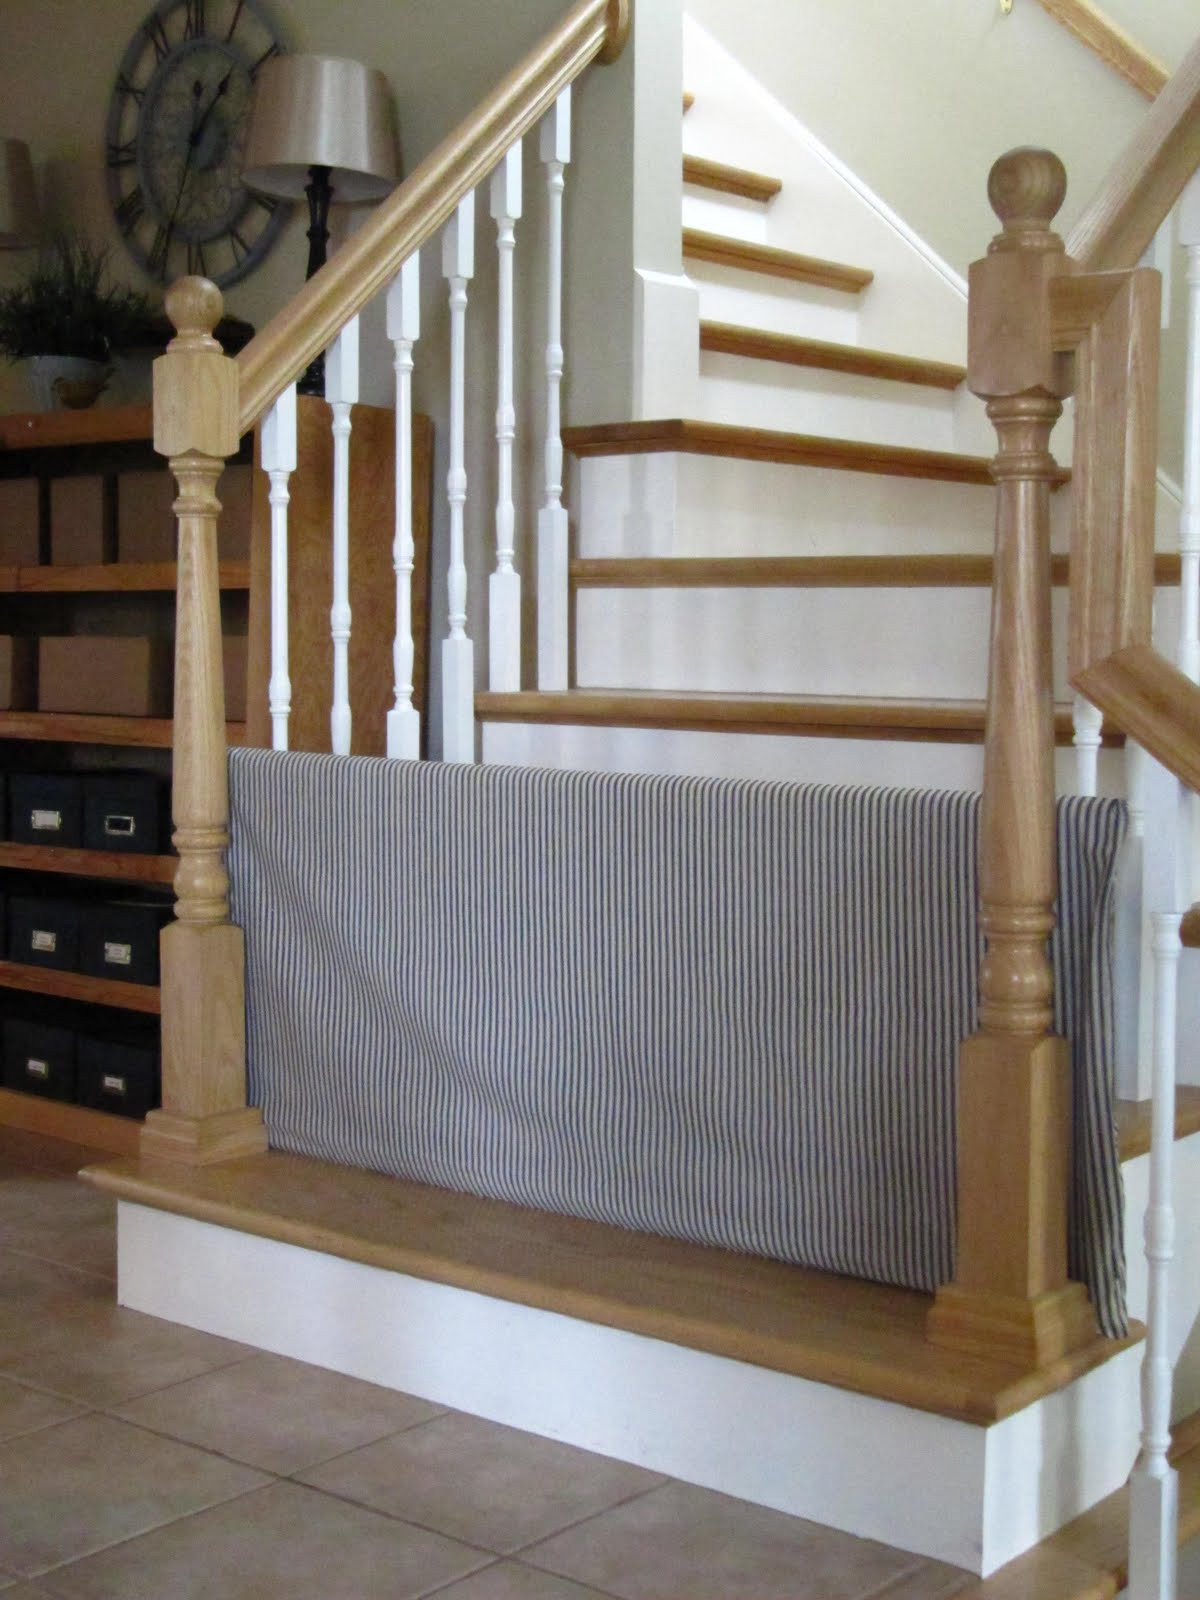 DIY Baby Gate Stairs
 20 DIY Baby Gate Ideas Fabric Pallet and Wood Frame